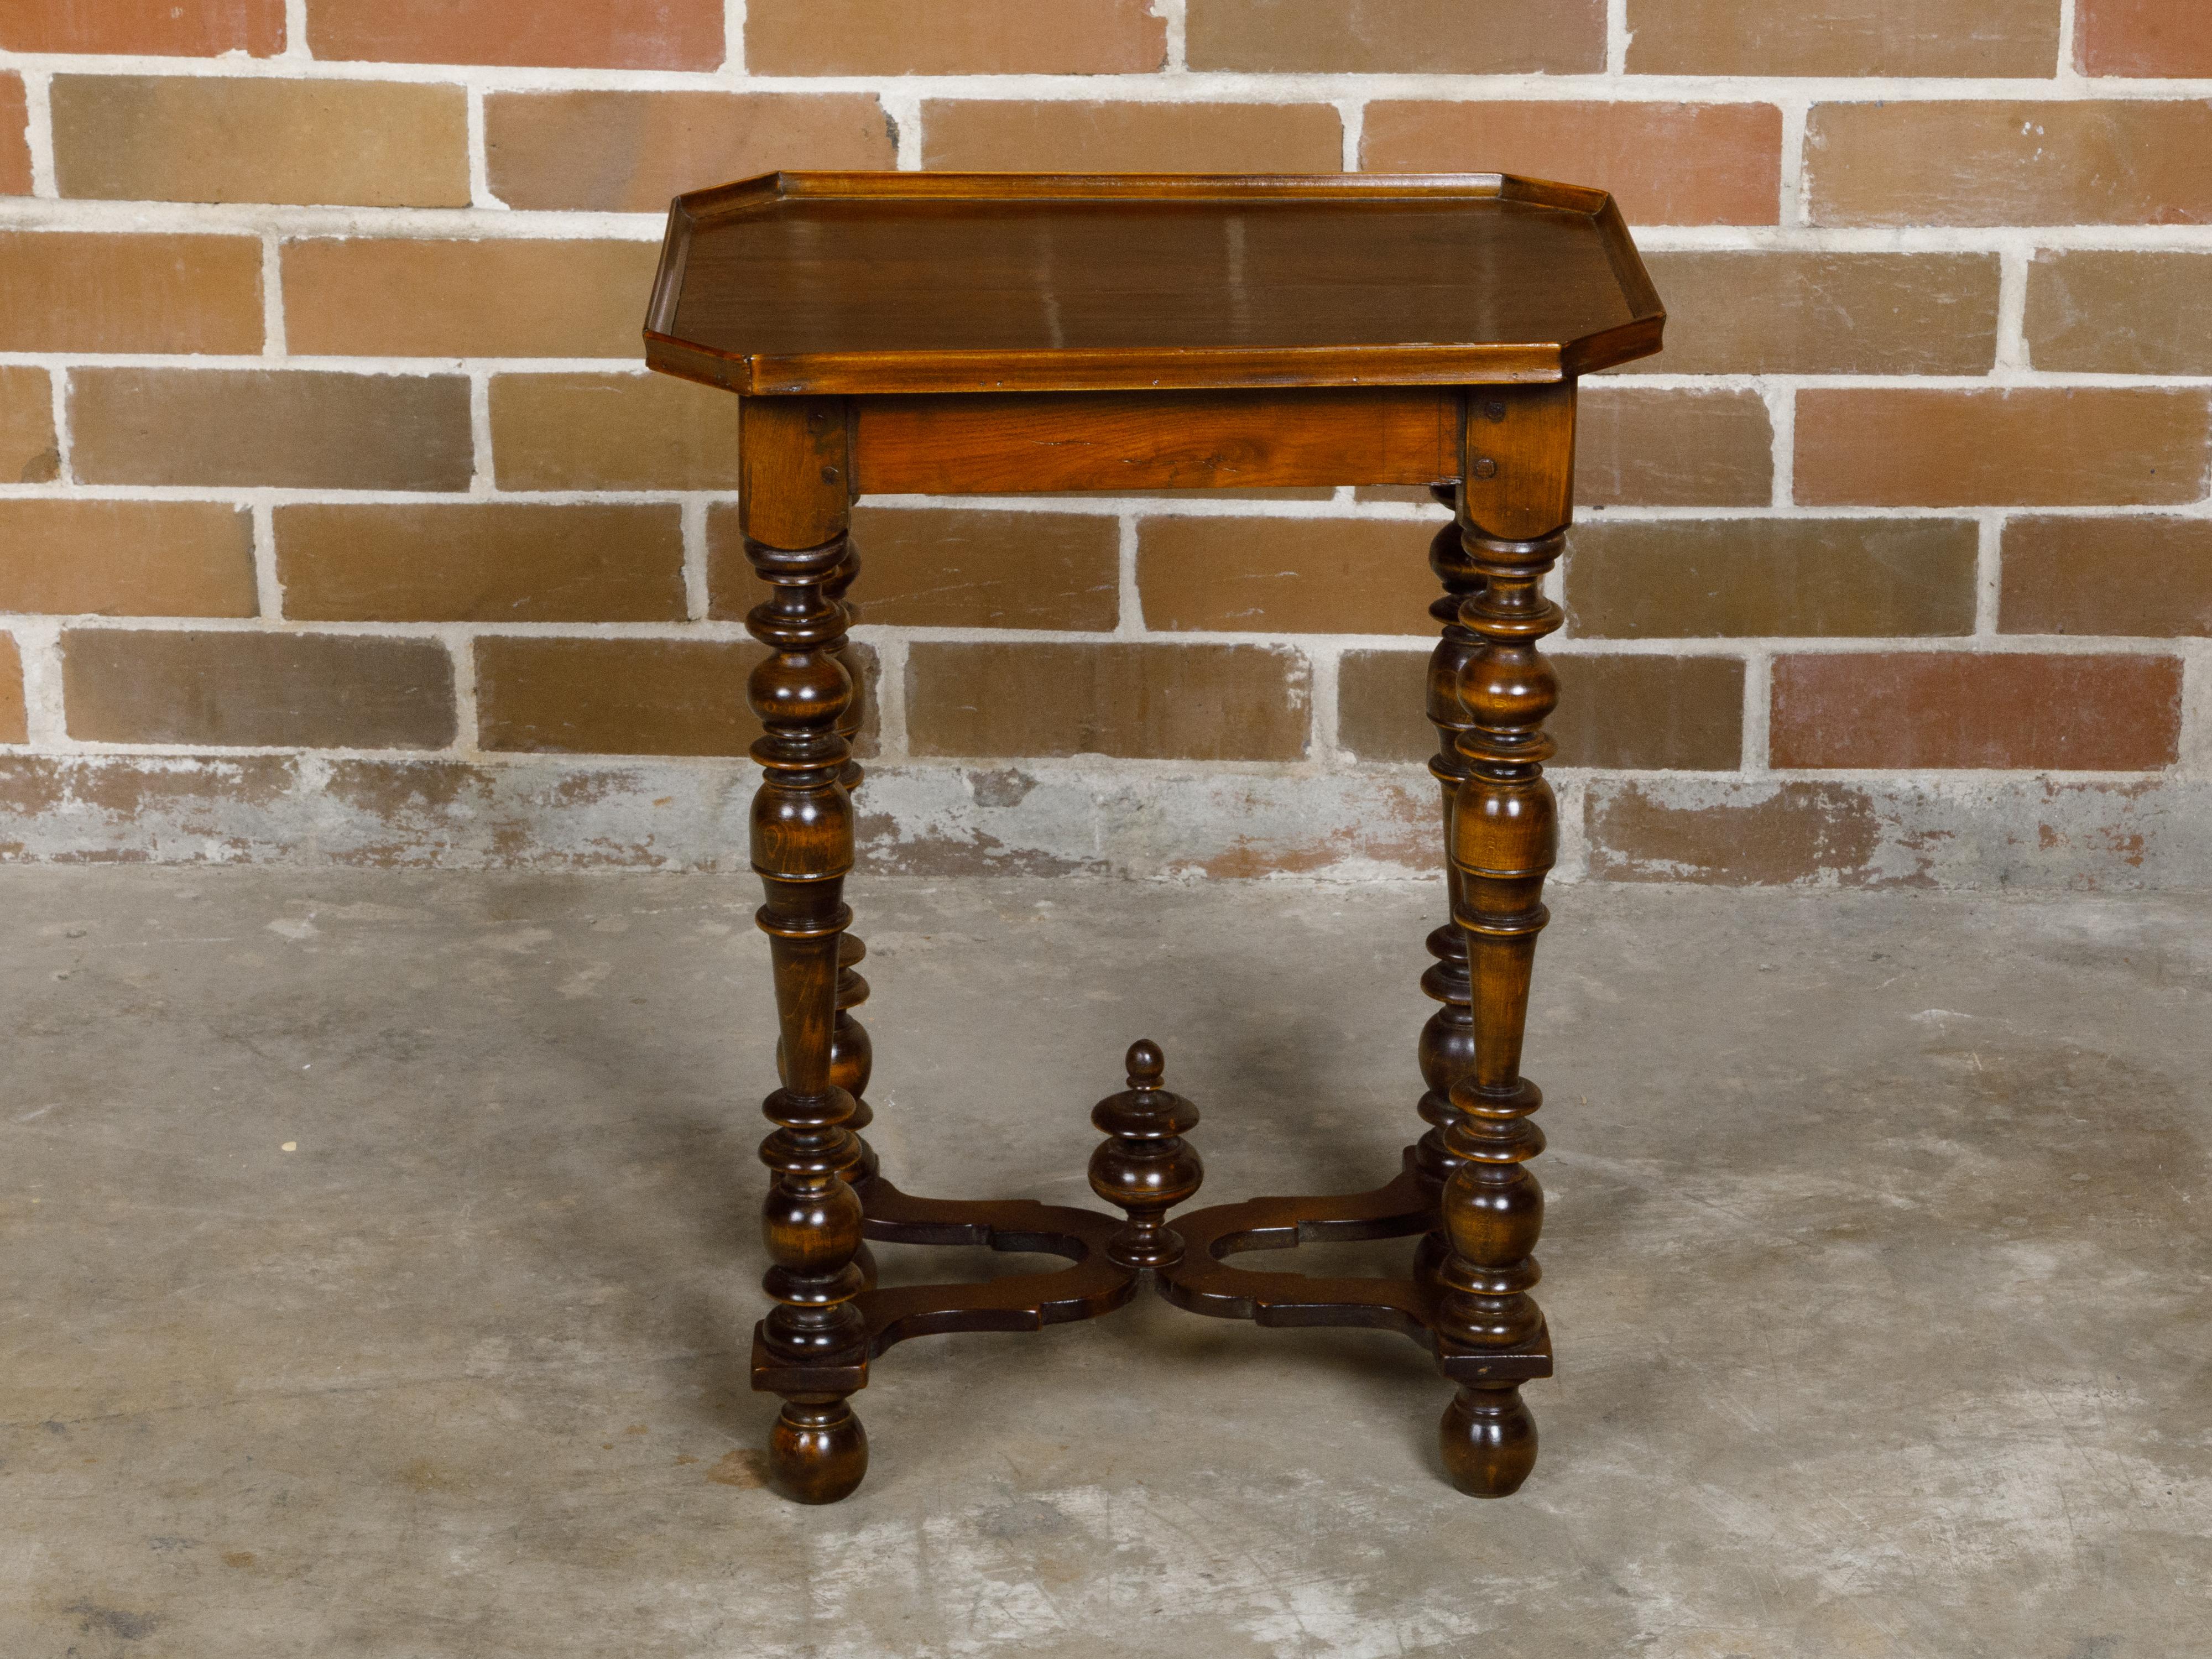 A petite French Louis XIII style walnut side table from the 19th century with tray top, spool legs and carved X-Form cross stretcher. This charming petite French Louis XIII style walnut side table, dating back to the 19th century, captures the